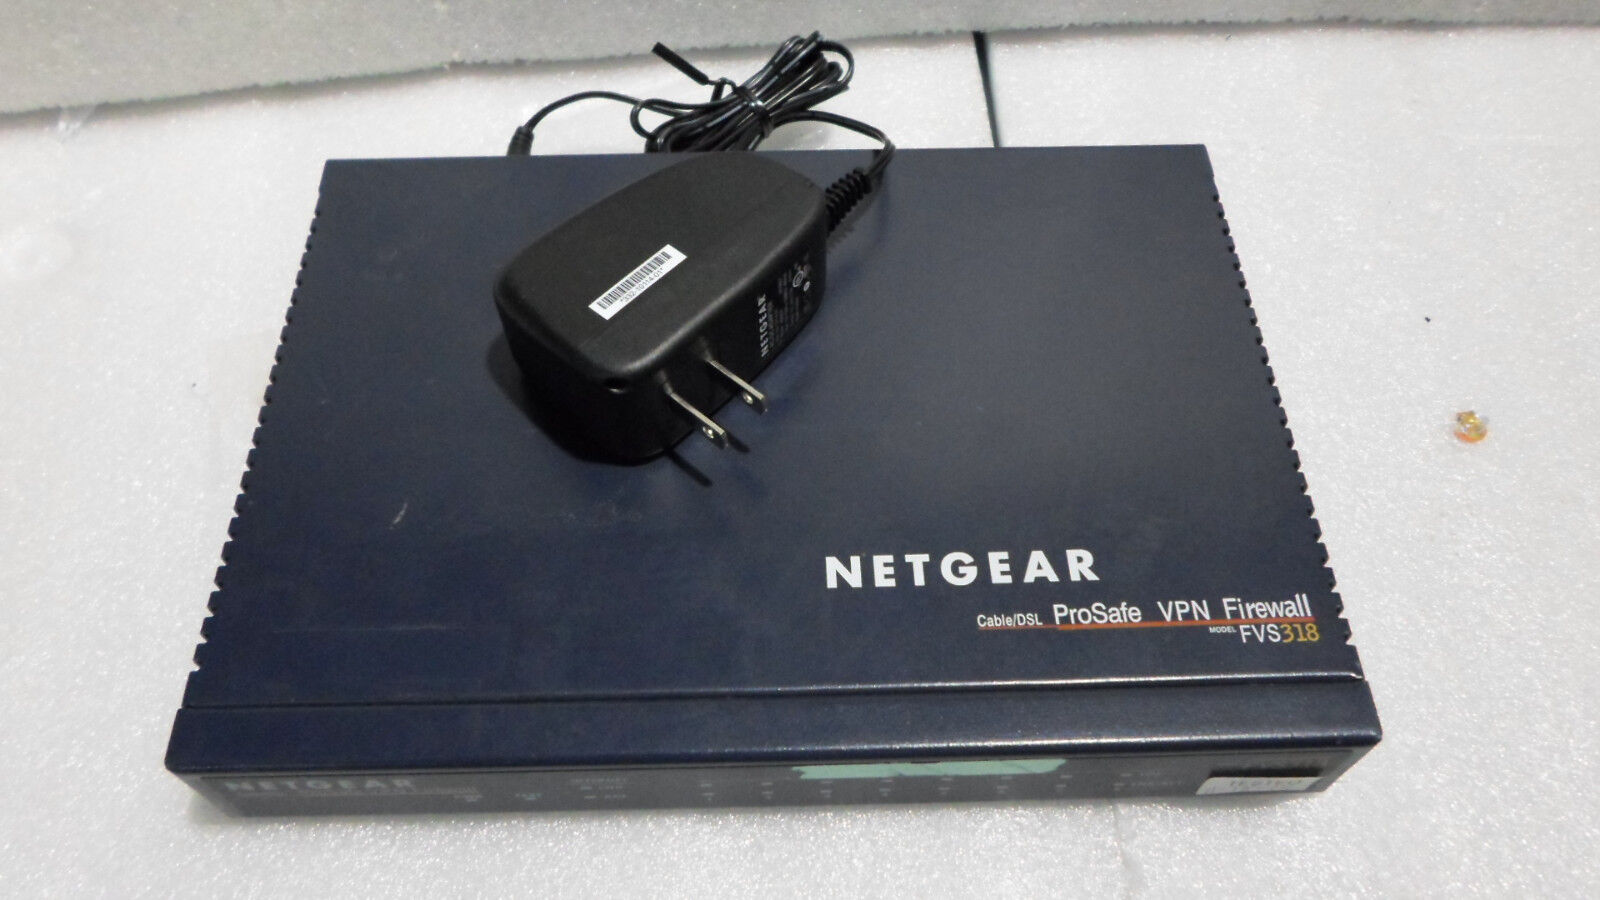 NETGEAR FVS318 CABLE/DSL PROSAFE VPN FIREWALL 8-PORTS W/AC ADAPTER USED &TESTED